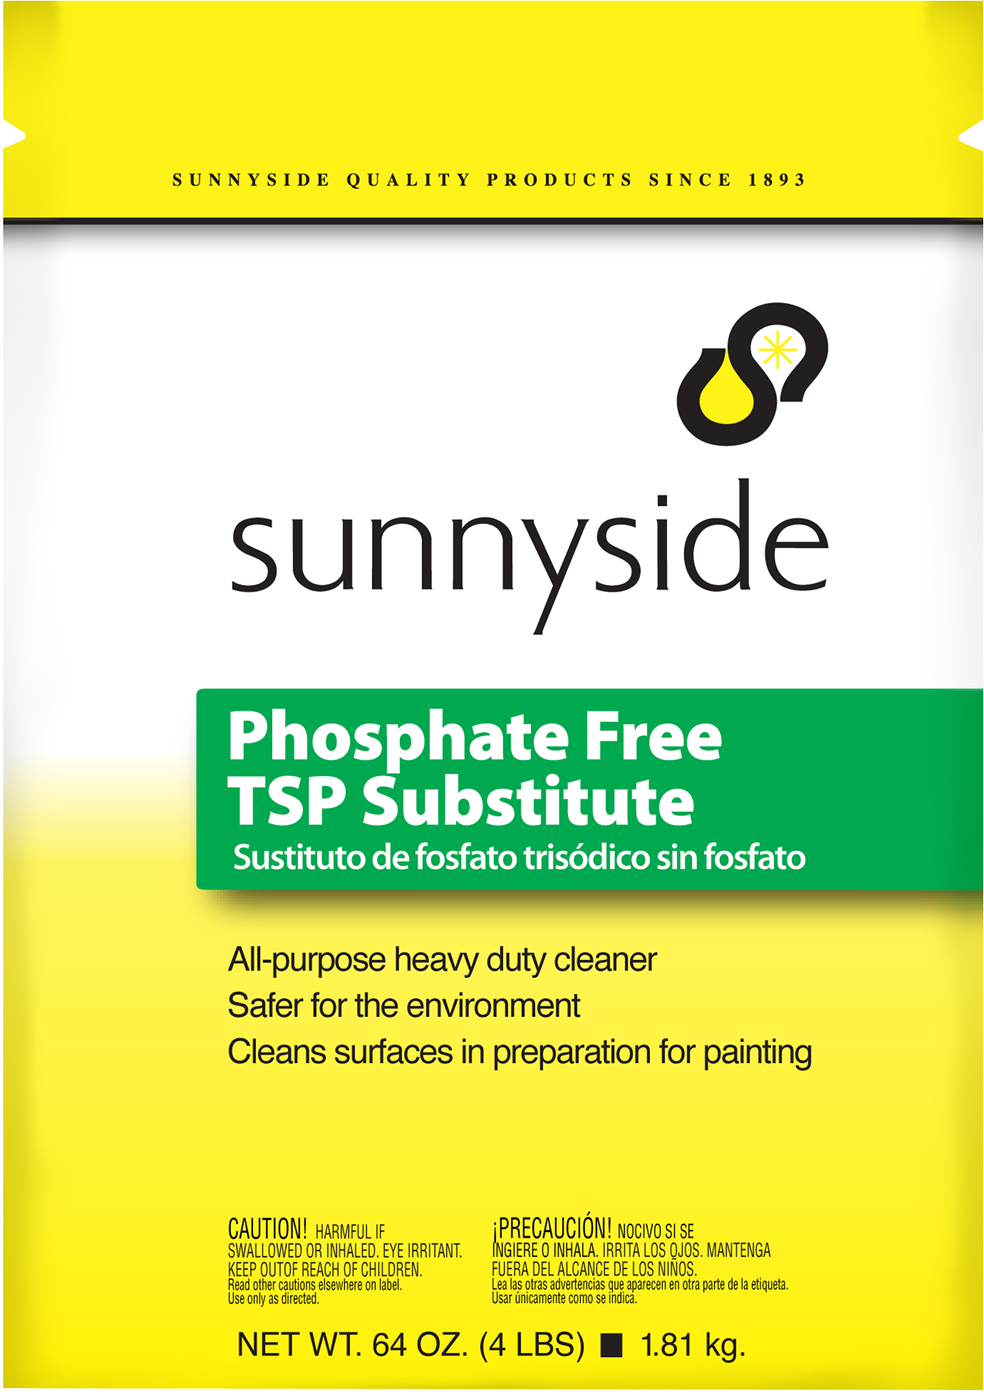 PHOSPHATE FREE TSP SUBSTITUTE Product Image